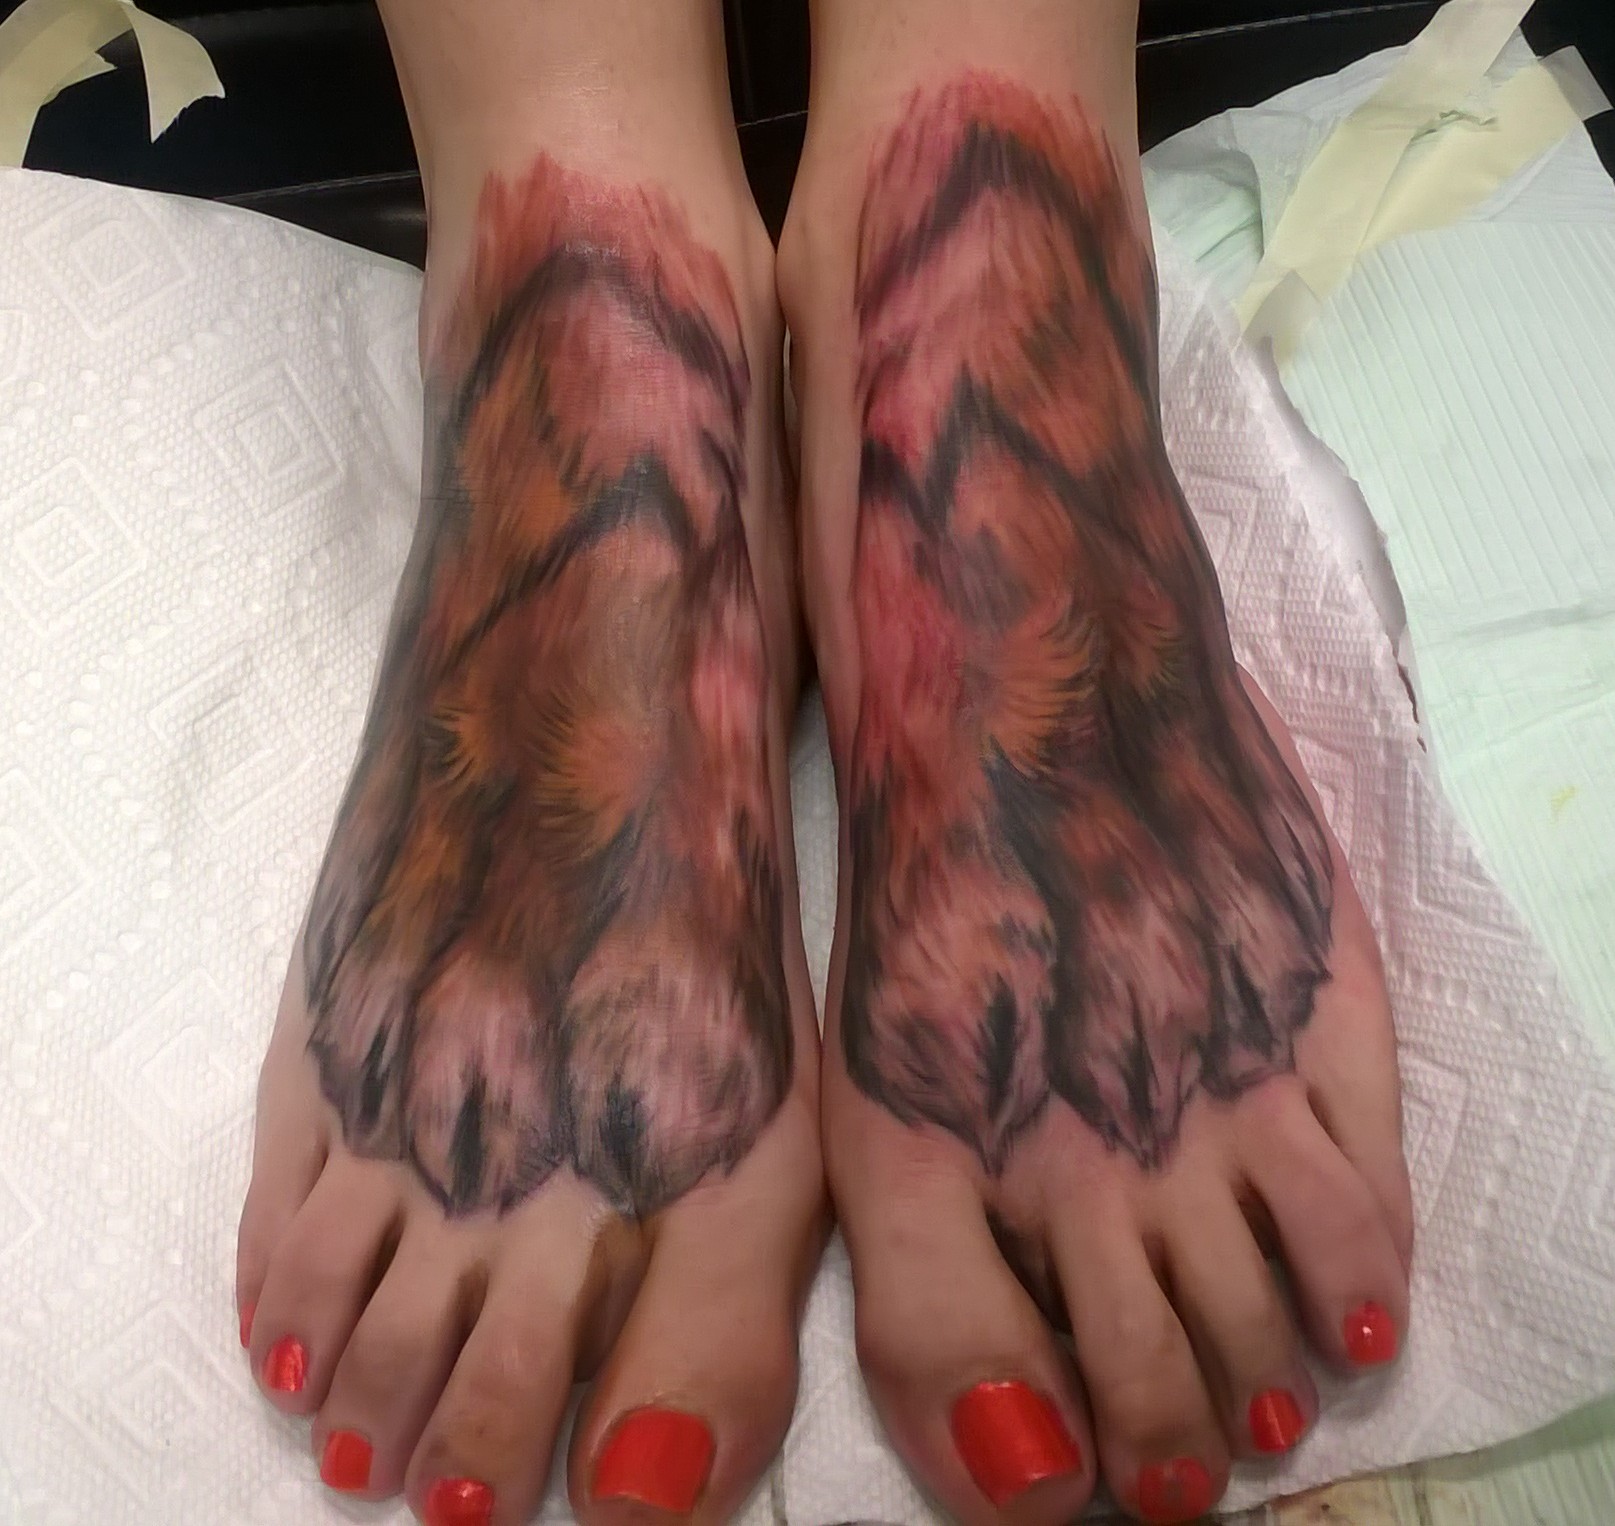 Lucky tiger paw by Anthony Low at Collar City Tattoo in Upstate NY  r tattoos